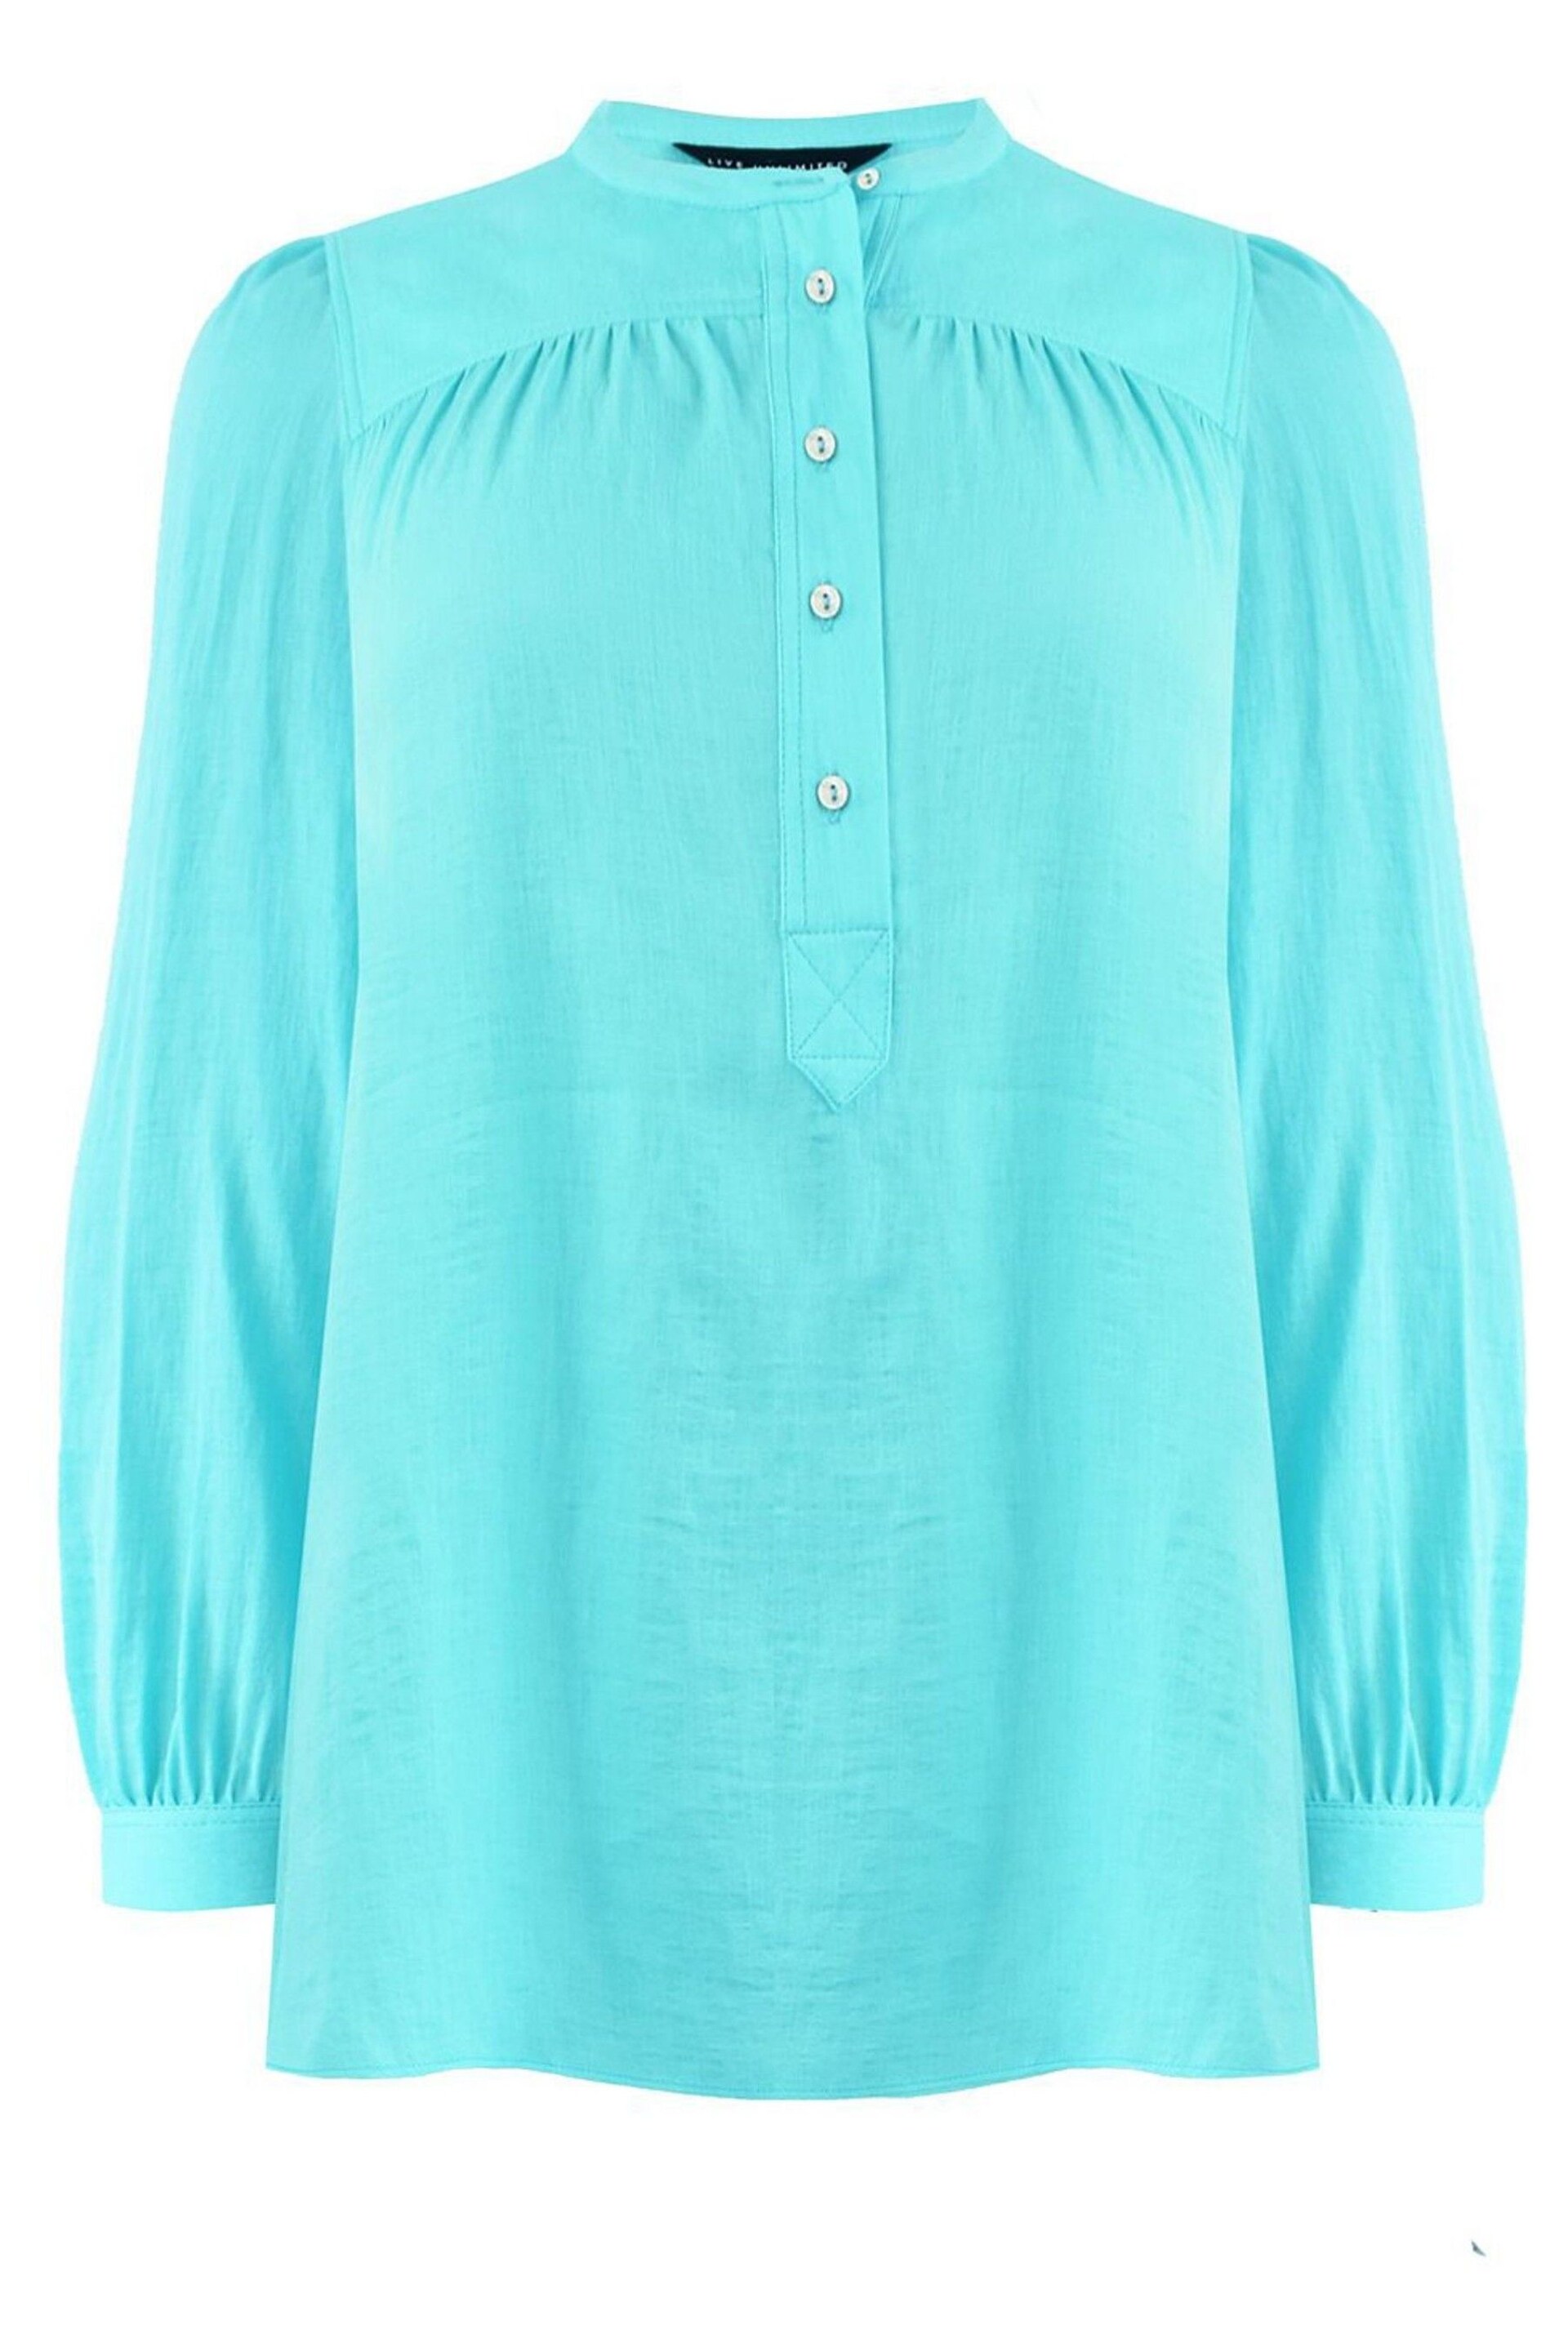 Live Unlimited Blue Curve Nehru Collar Blouse - Image 9 of 9